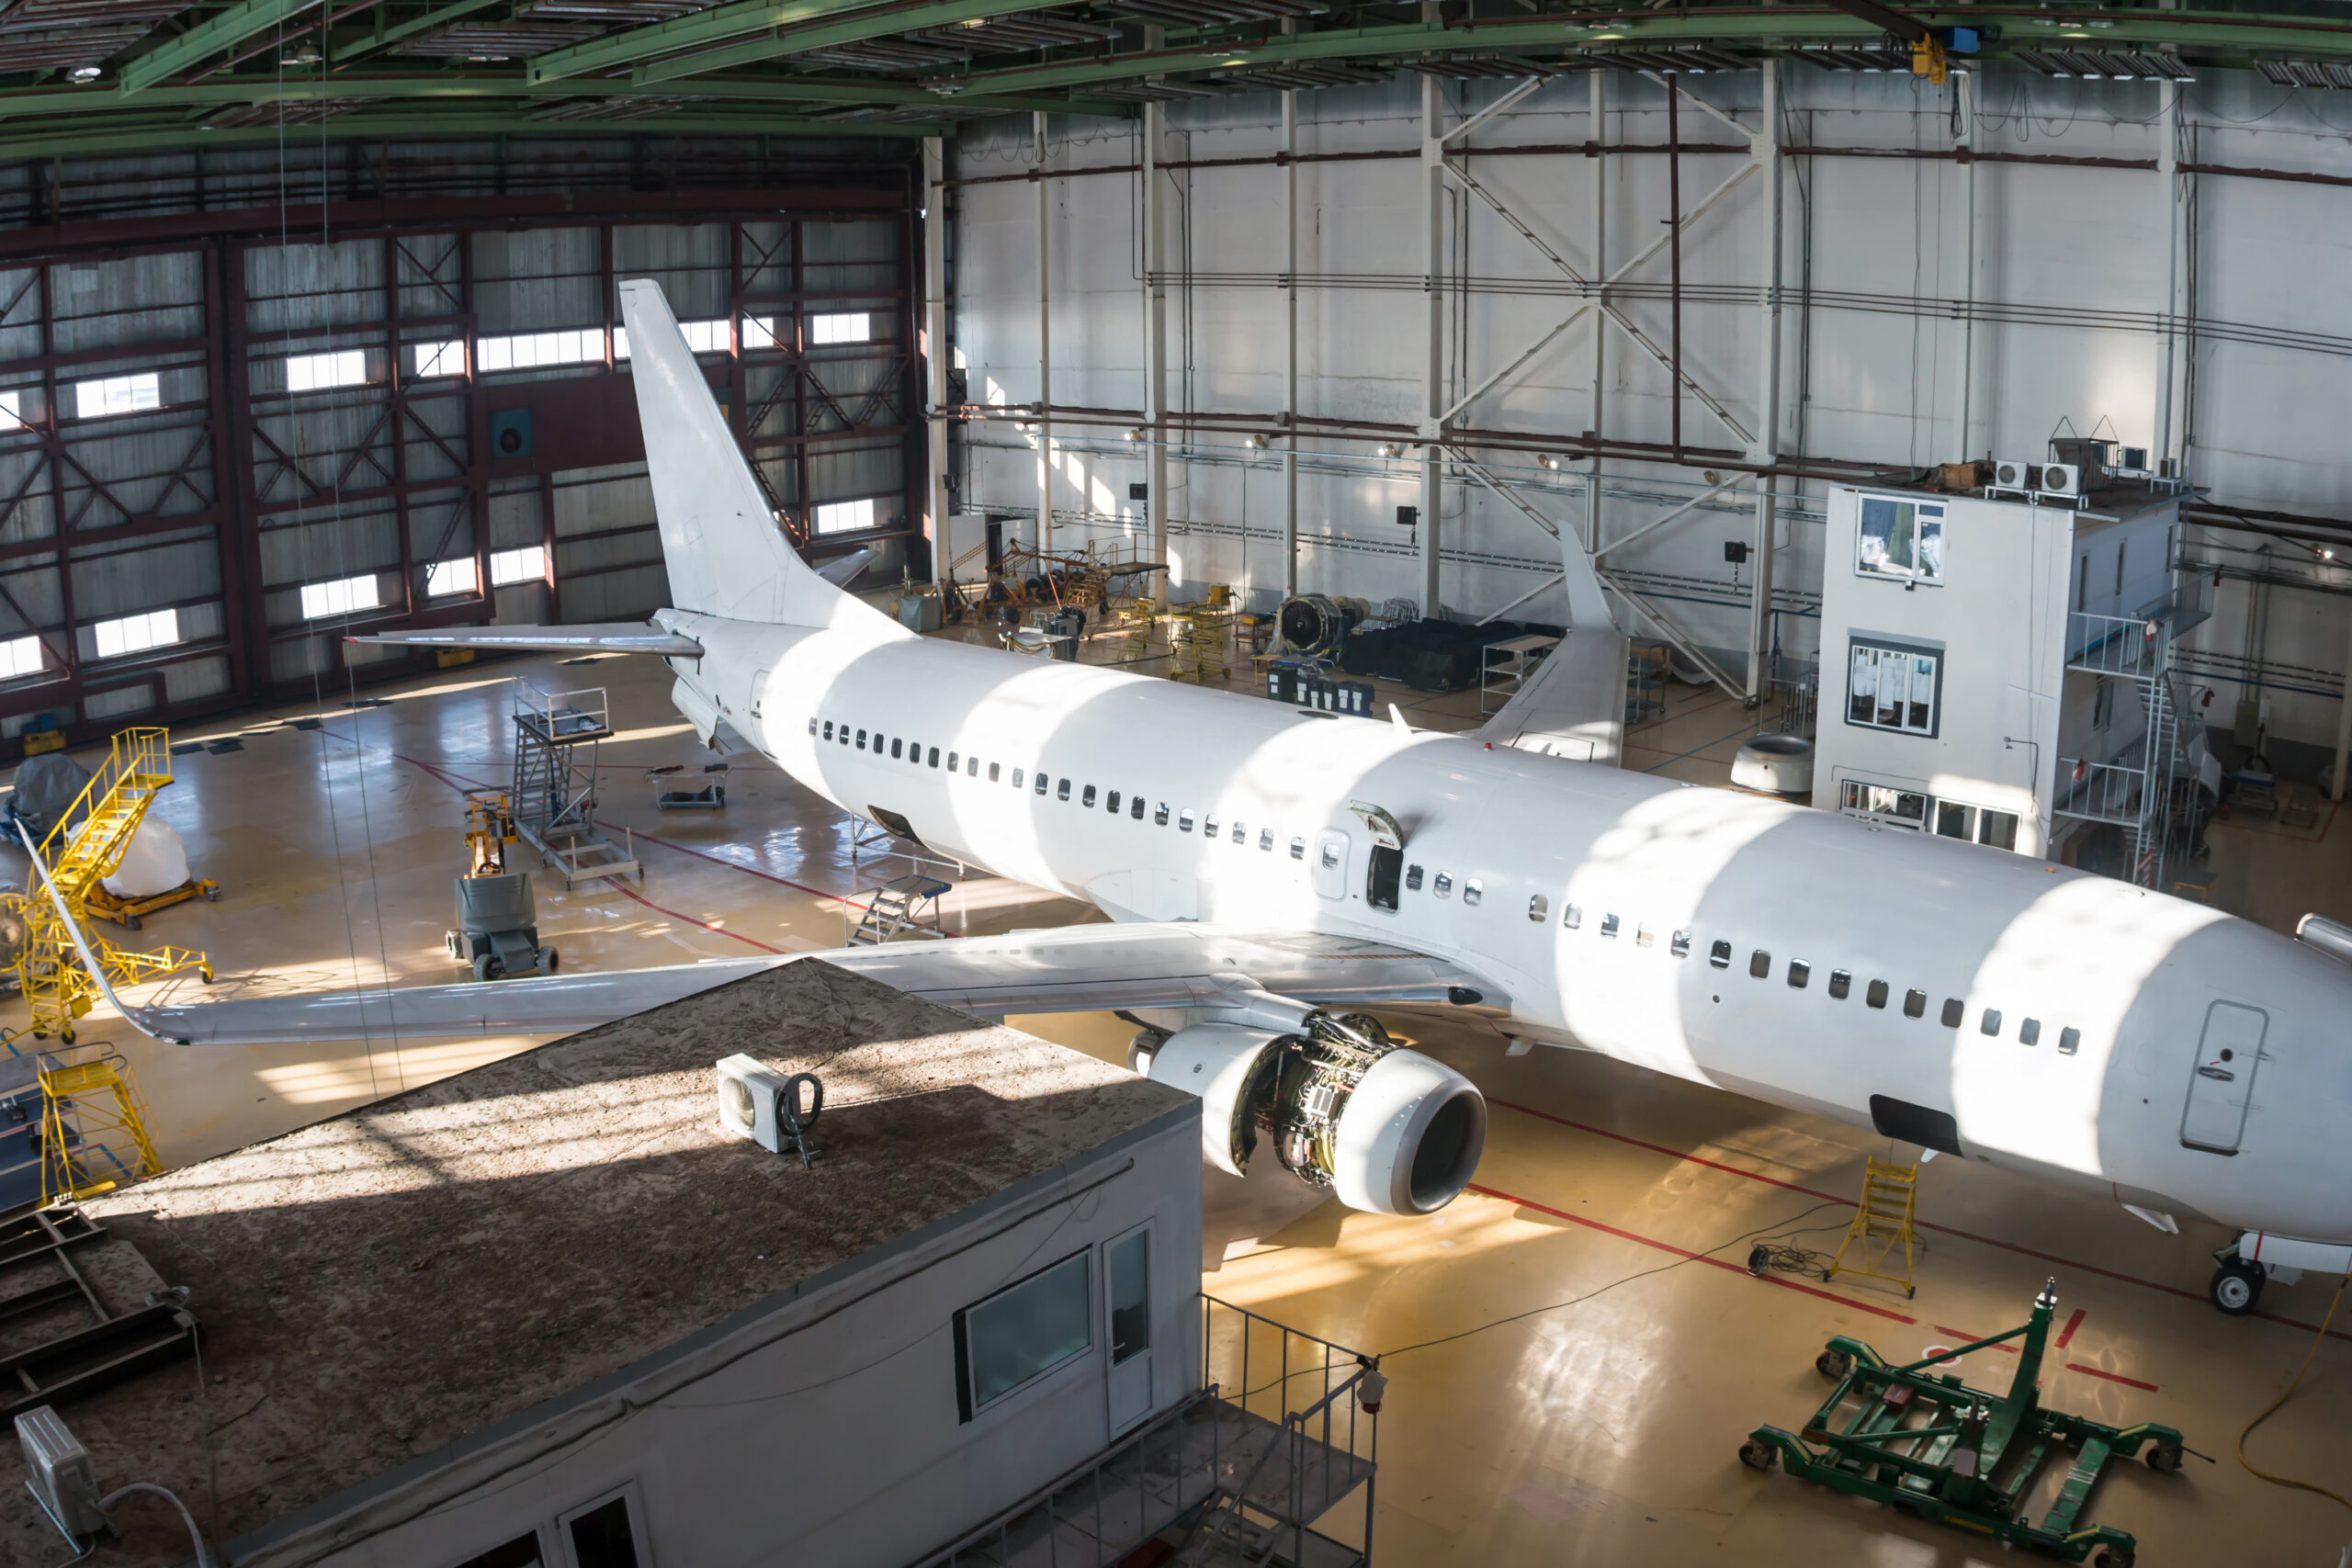 Interim CEO To Lead Difficult Transition for Aerospace Distribution